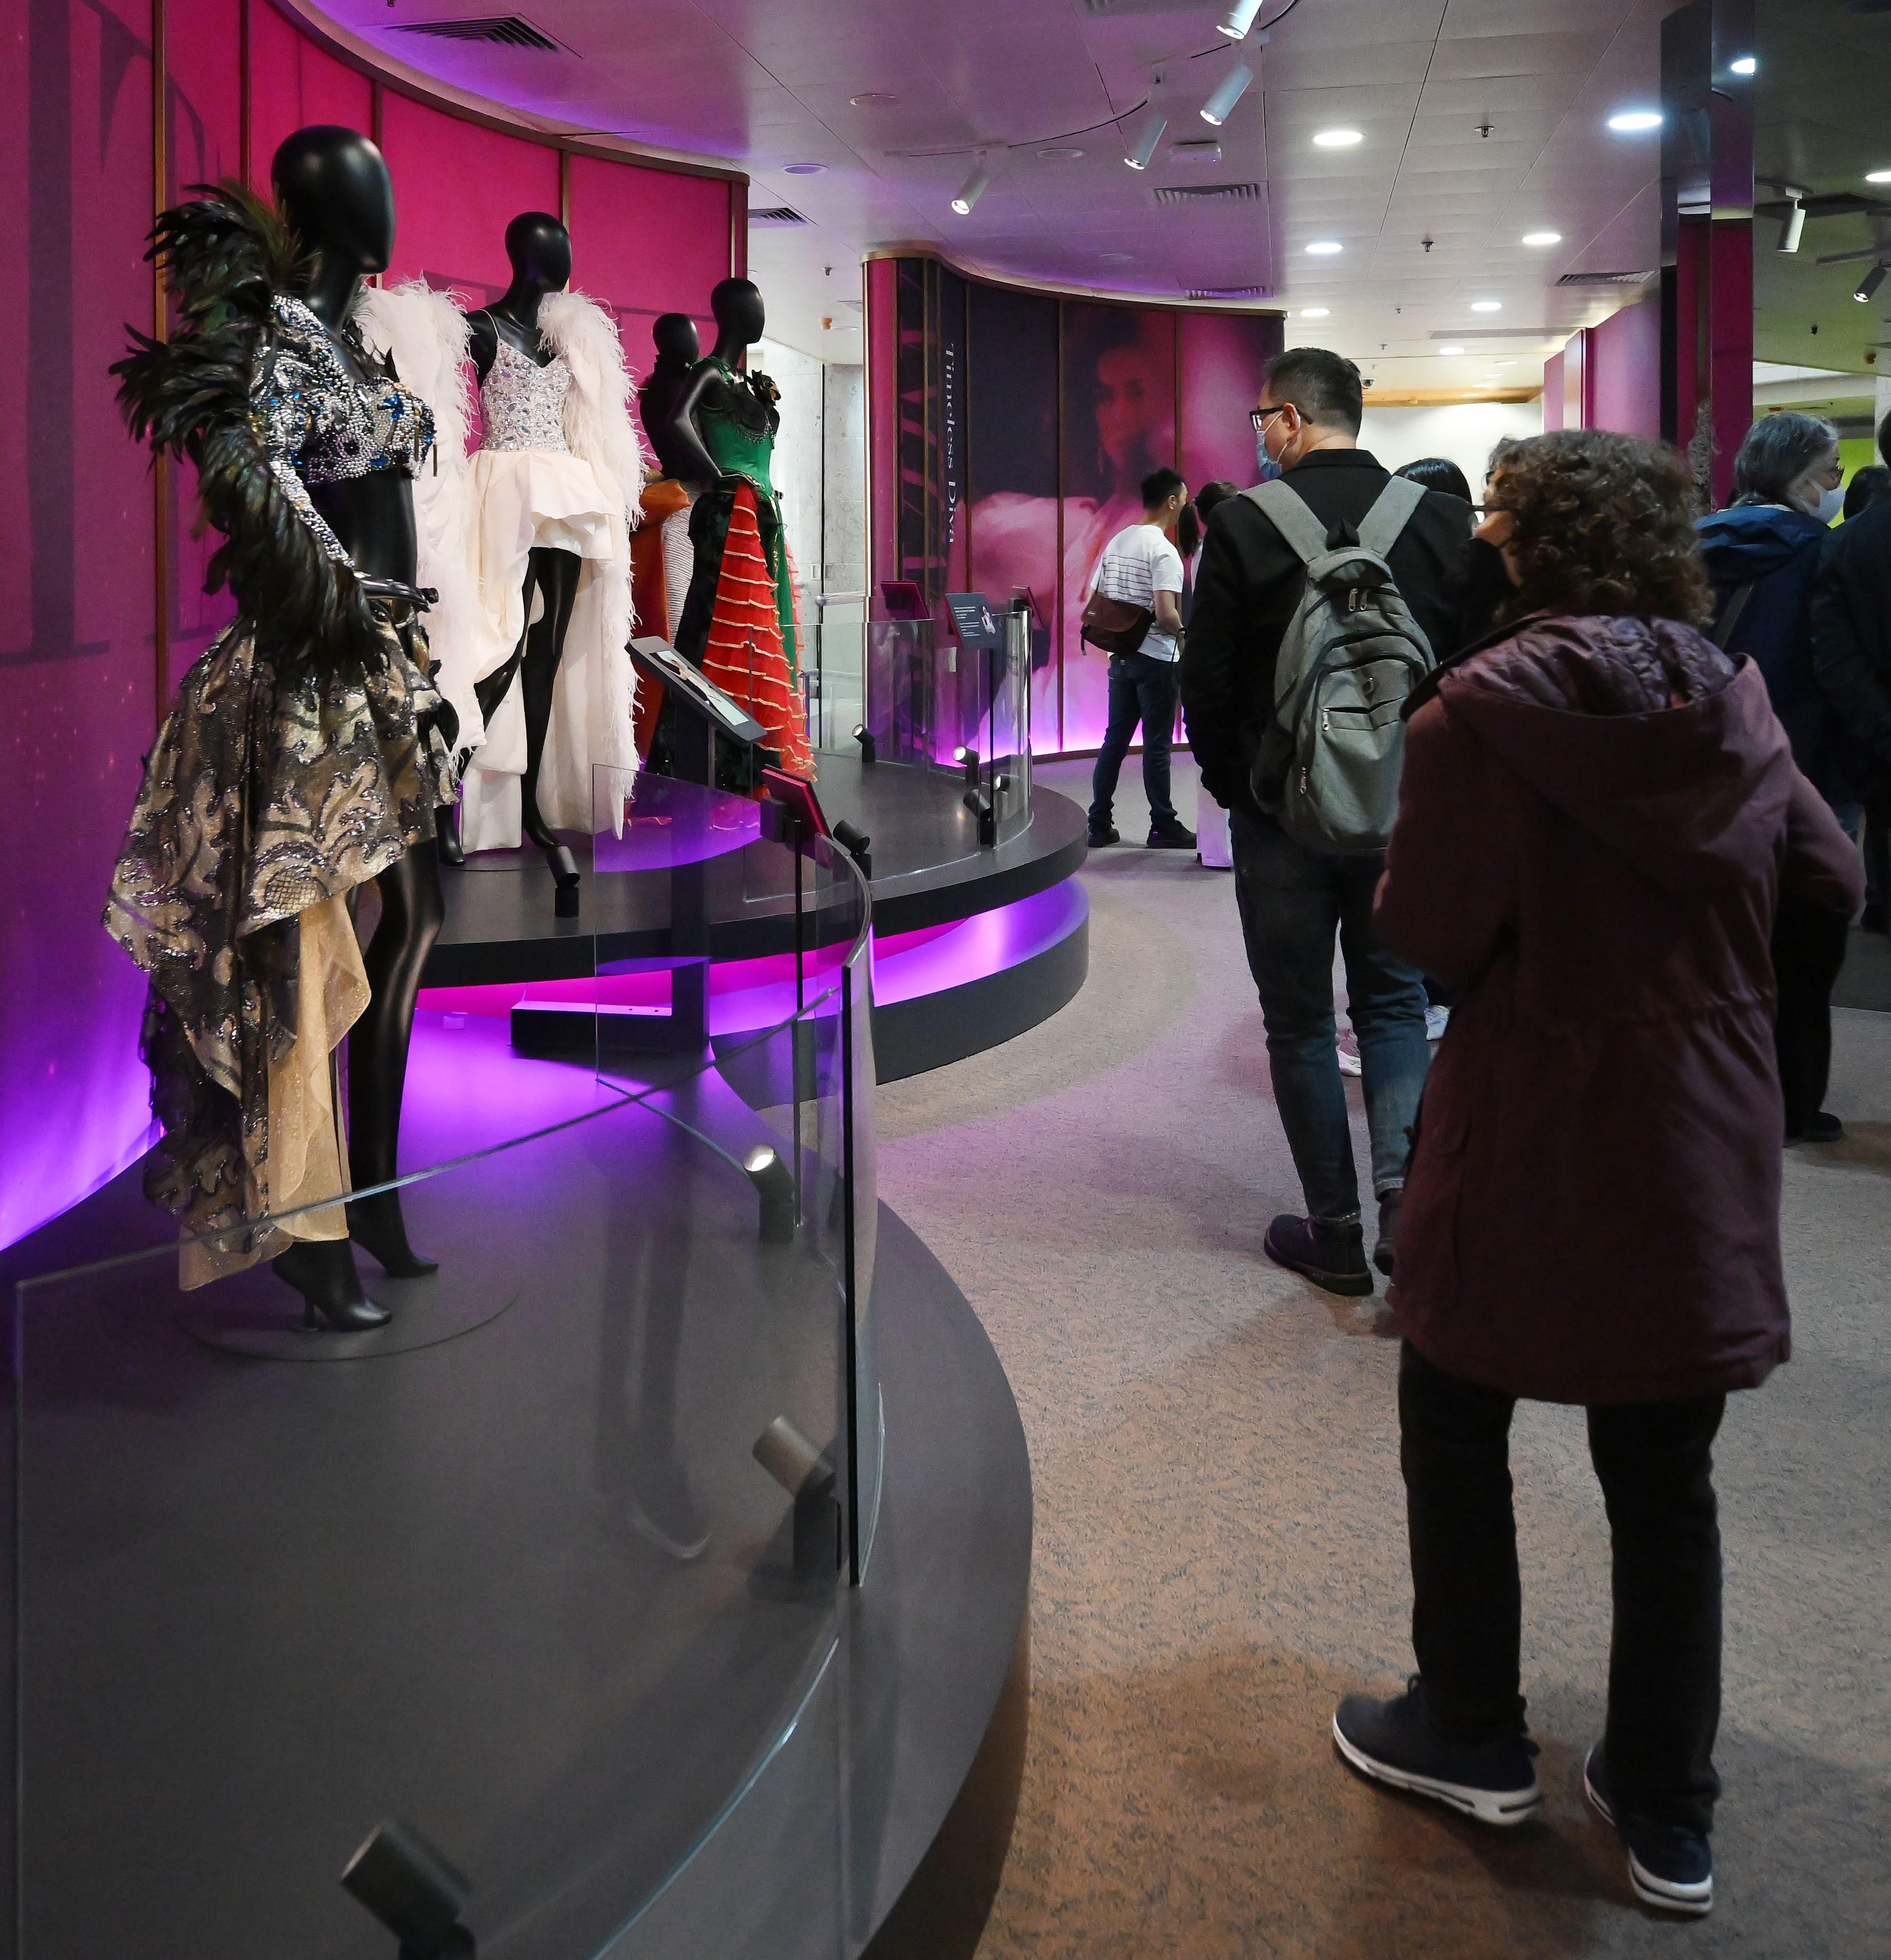 The "Timeless Diva: Anita Mui" exhibition at the Hong Kong Heritage Museum has been widely welcomed by the local public and visitors. It has reached 200 000 visitors from its opening on December 24 last year to today (May 2). Photo shows visitors touring the exhibition.